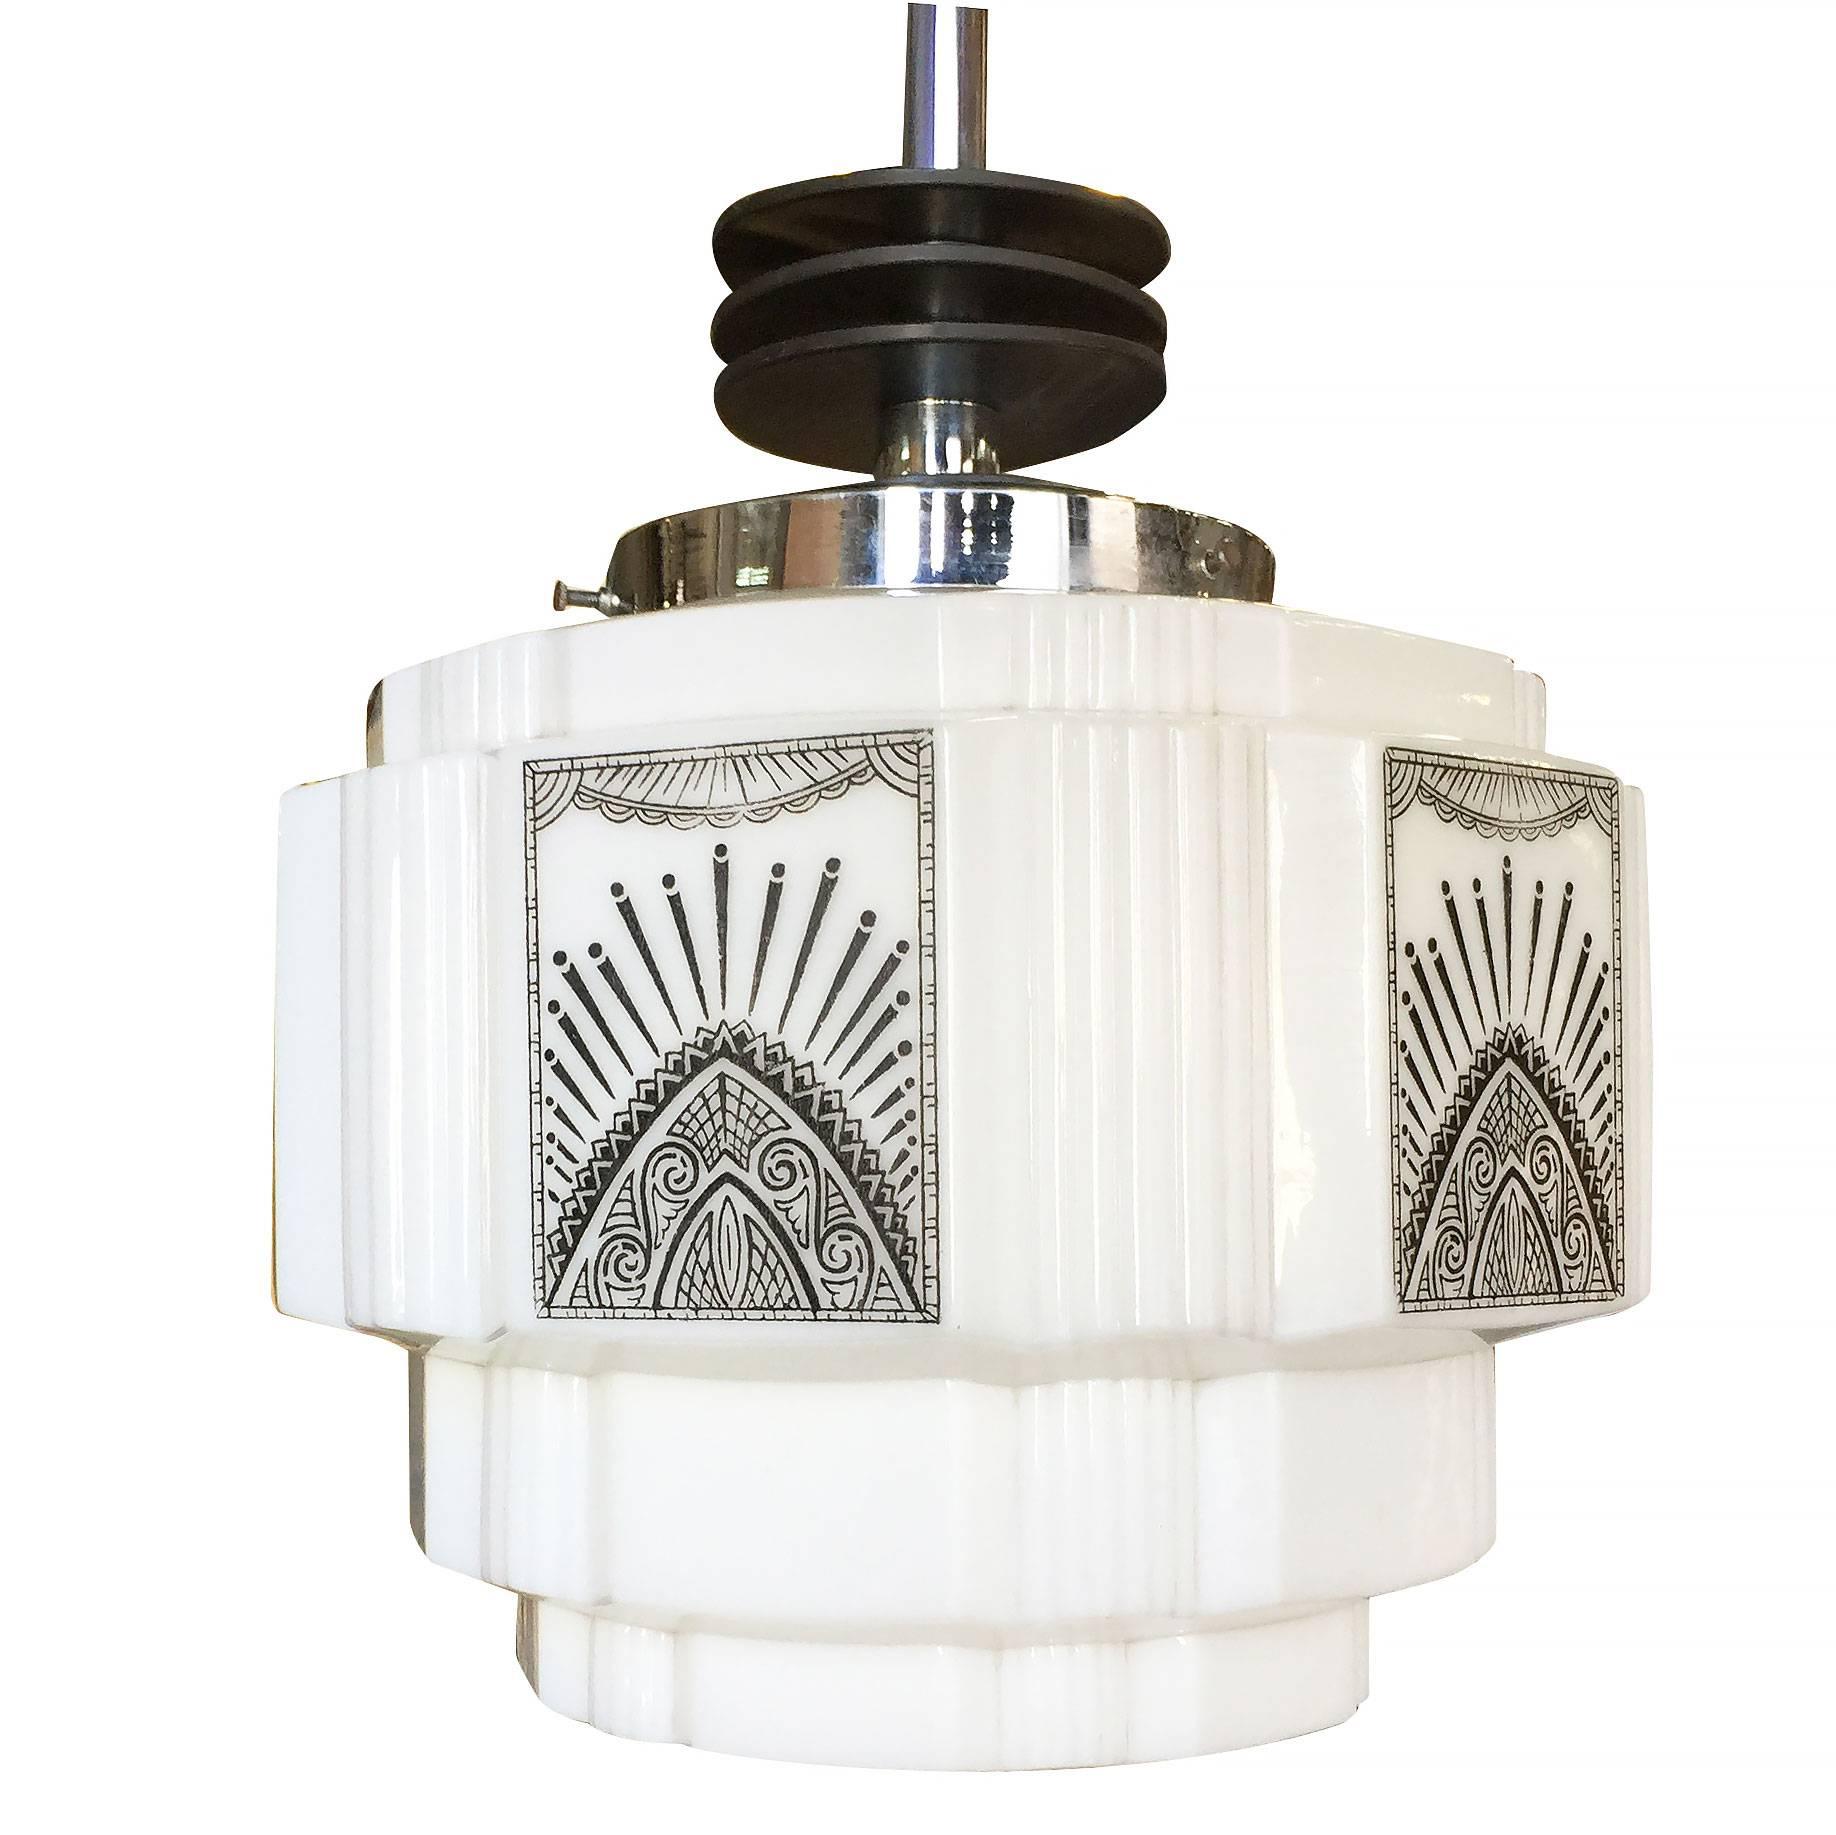 Rare Art Deco chrome ceiling pendant with enameled black streamline accents and stepped milk glass geometric schoolhouse style globe with hand-painted Art Deco design.